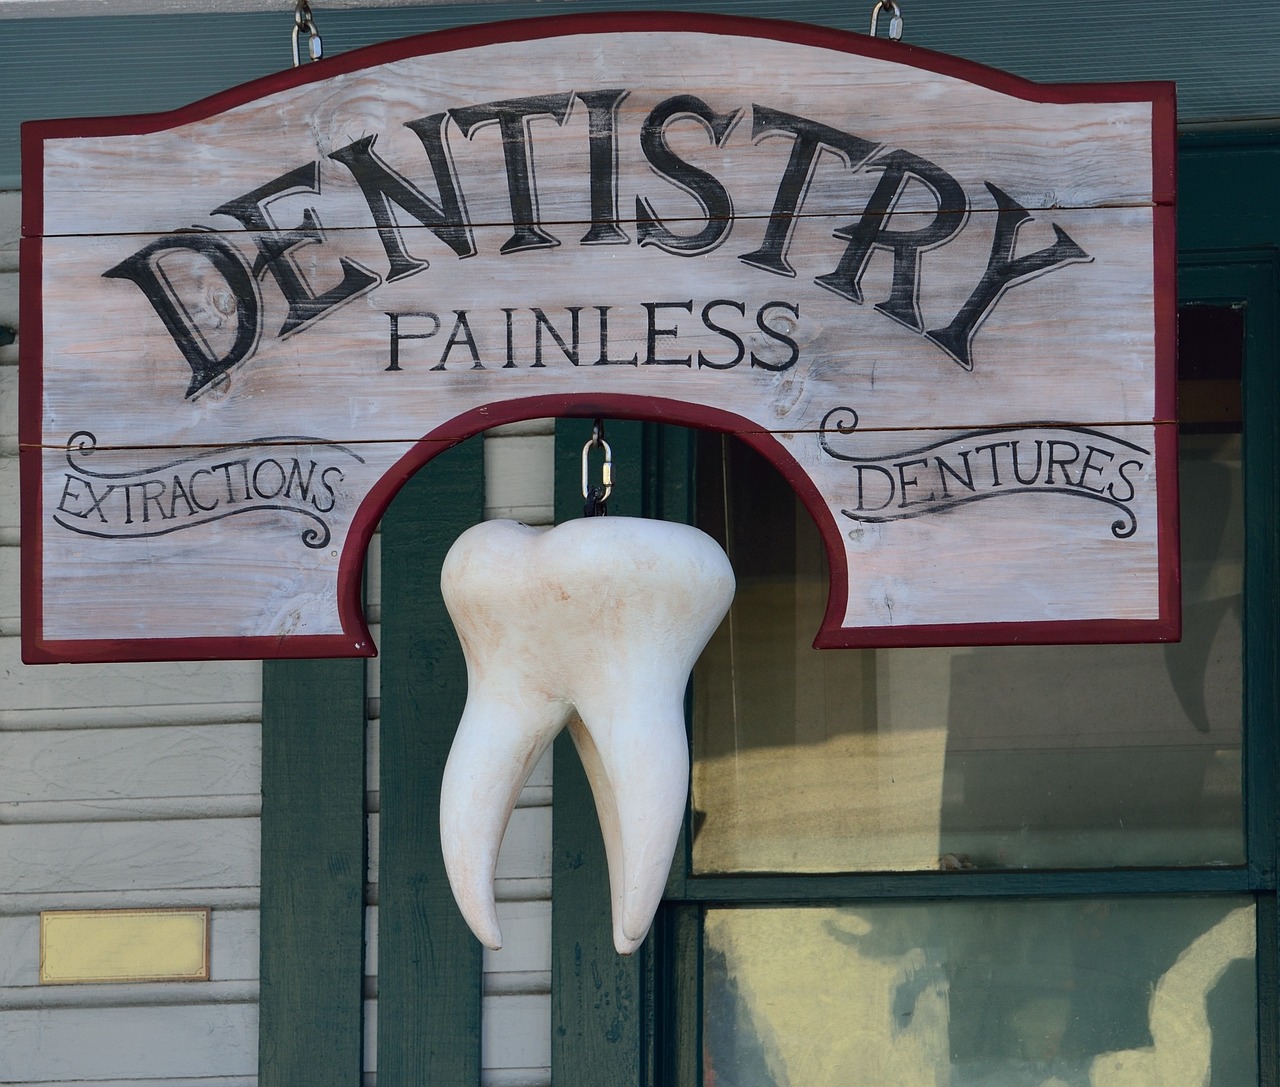 Looking for the Best Dentist in Eastwood? We’ve Got You Covered!